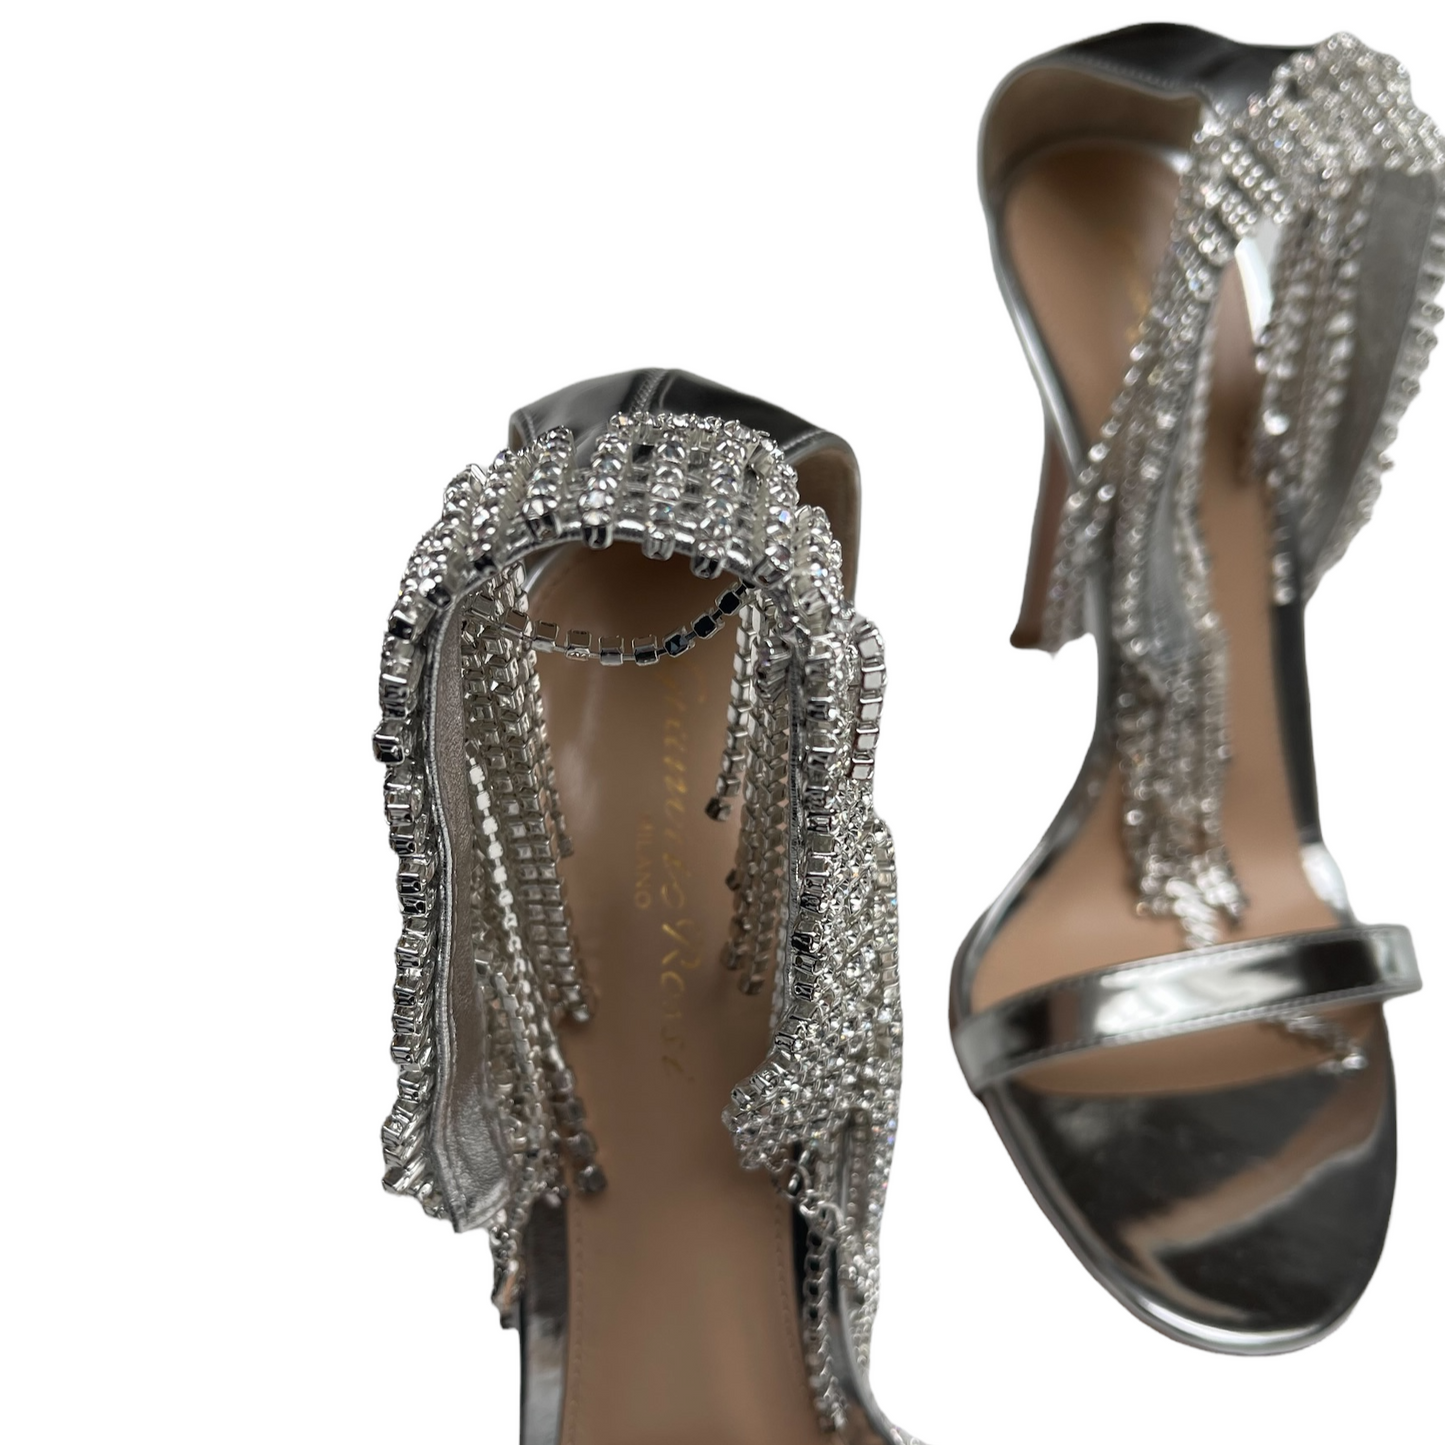 Silver Patent Leather and Crystals Heels - 8